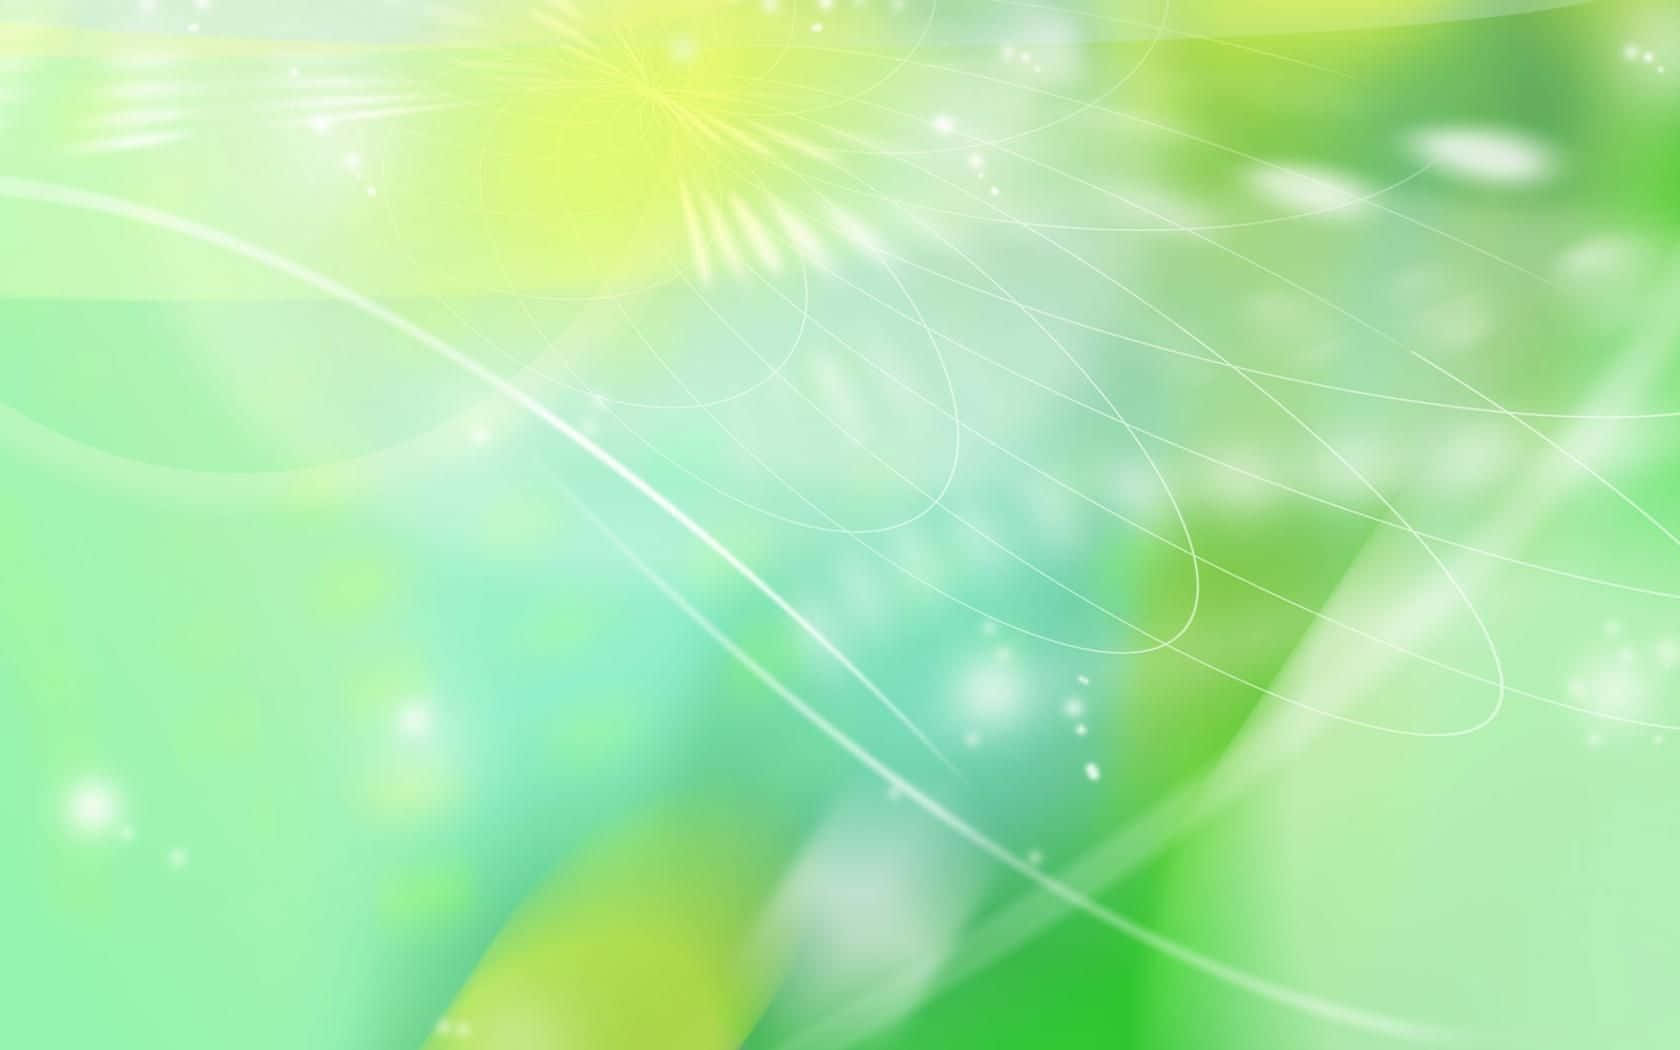 Green aesthetic wallpaper abstract Vectors & Illustrations for Free  Download